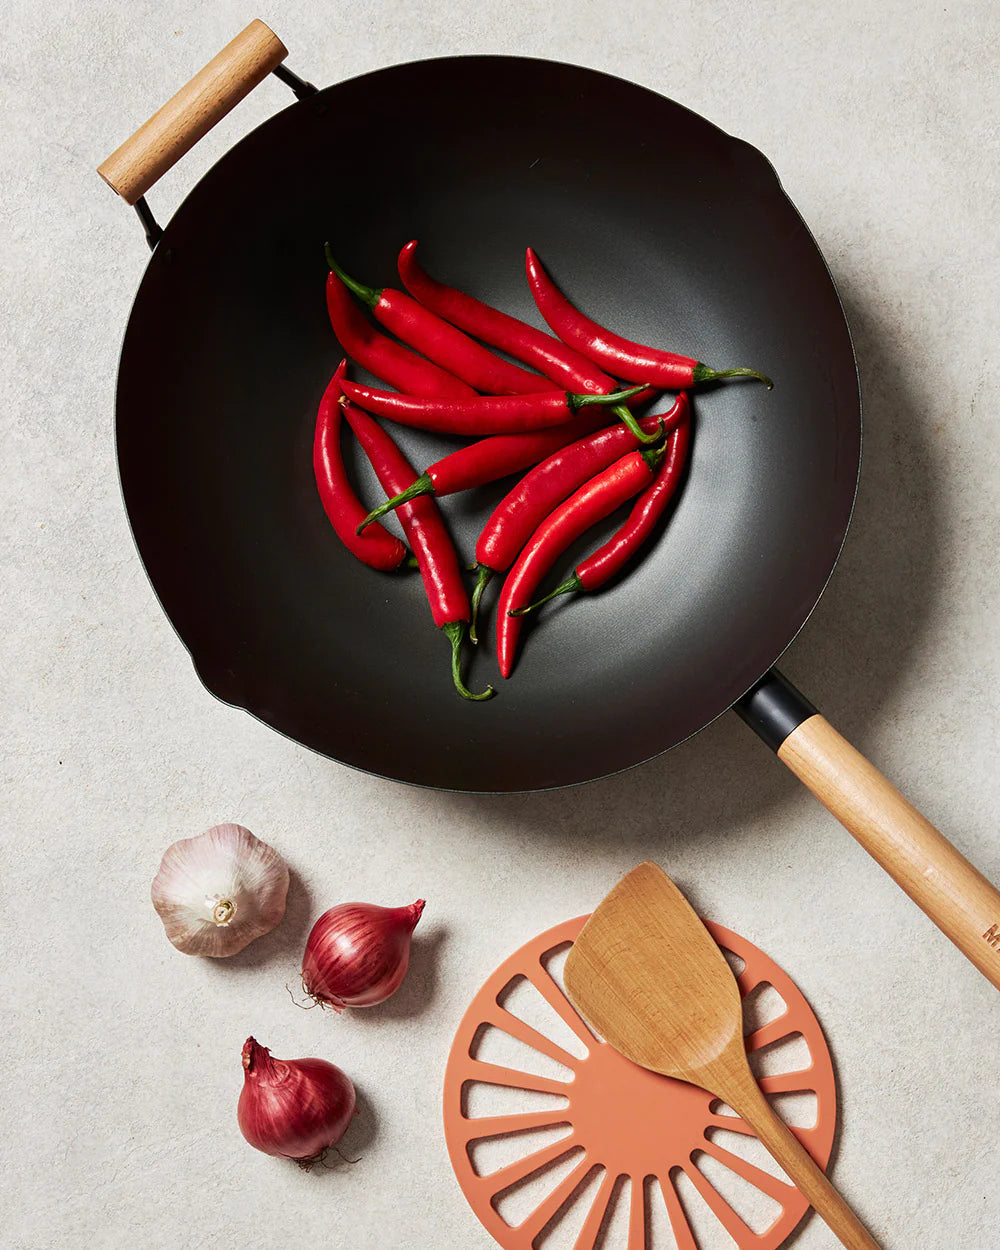 So many wok choices. But which material makes for the best wok?